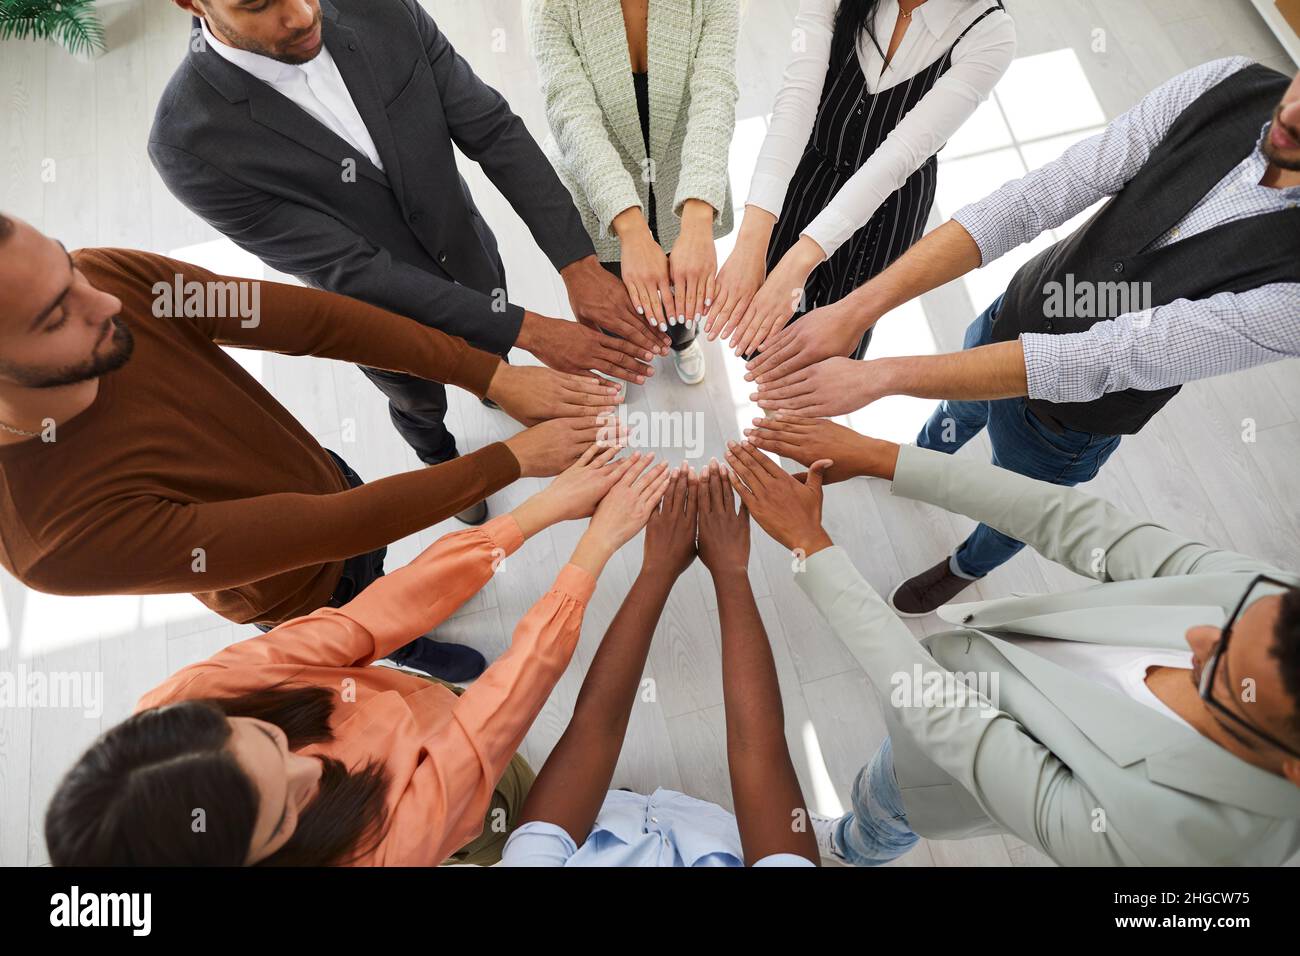 Diverse employees join hands engaged in teambuilding Stock Photo